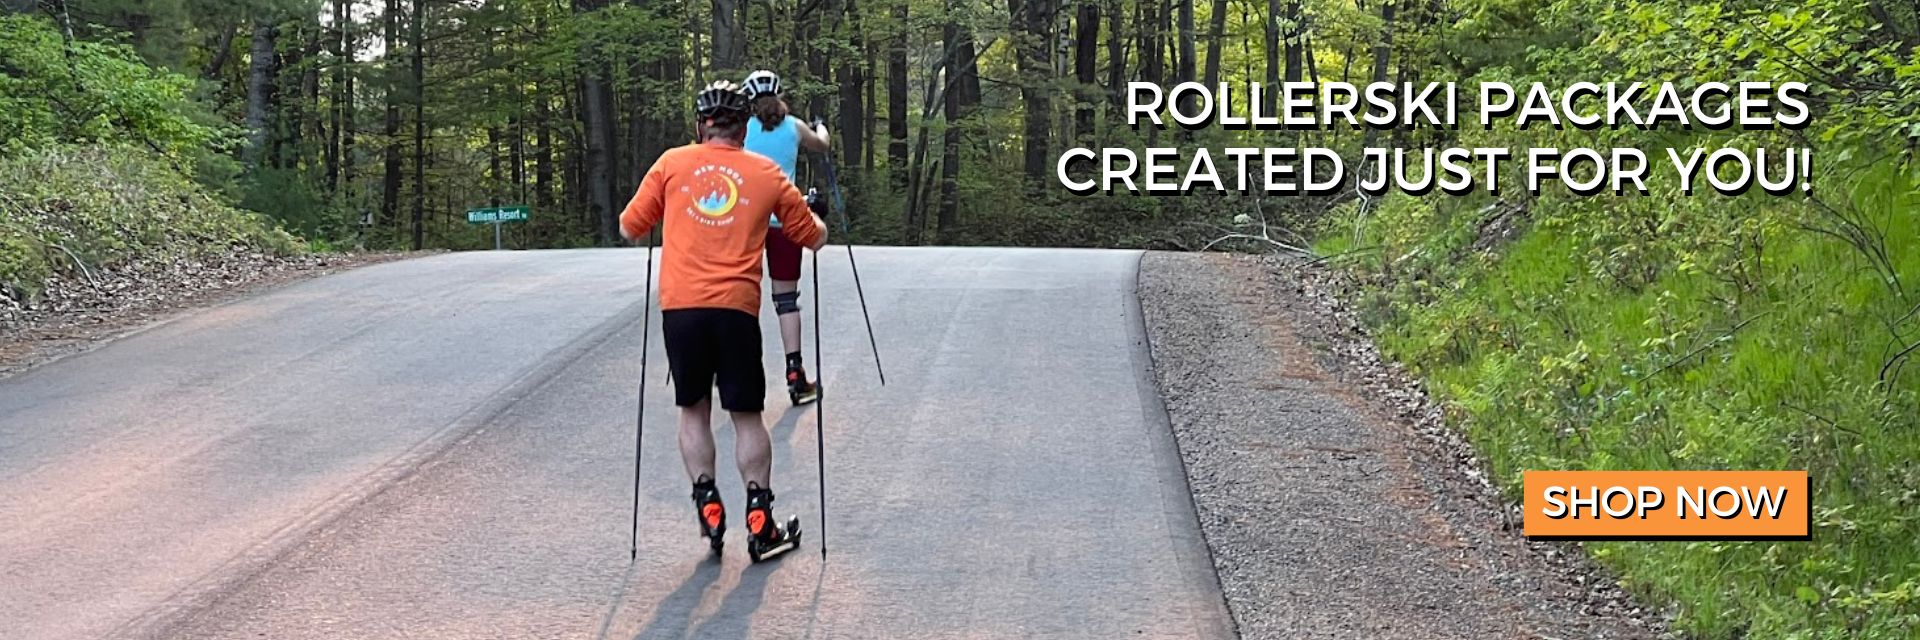 classic and skate rollerski packages